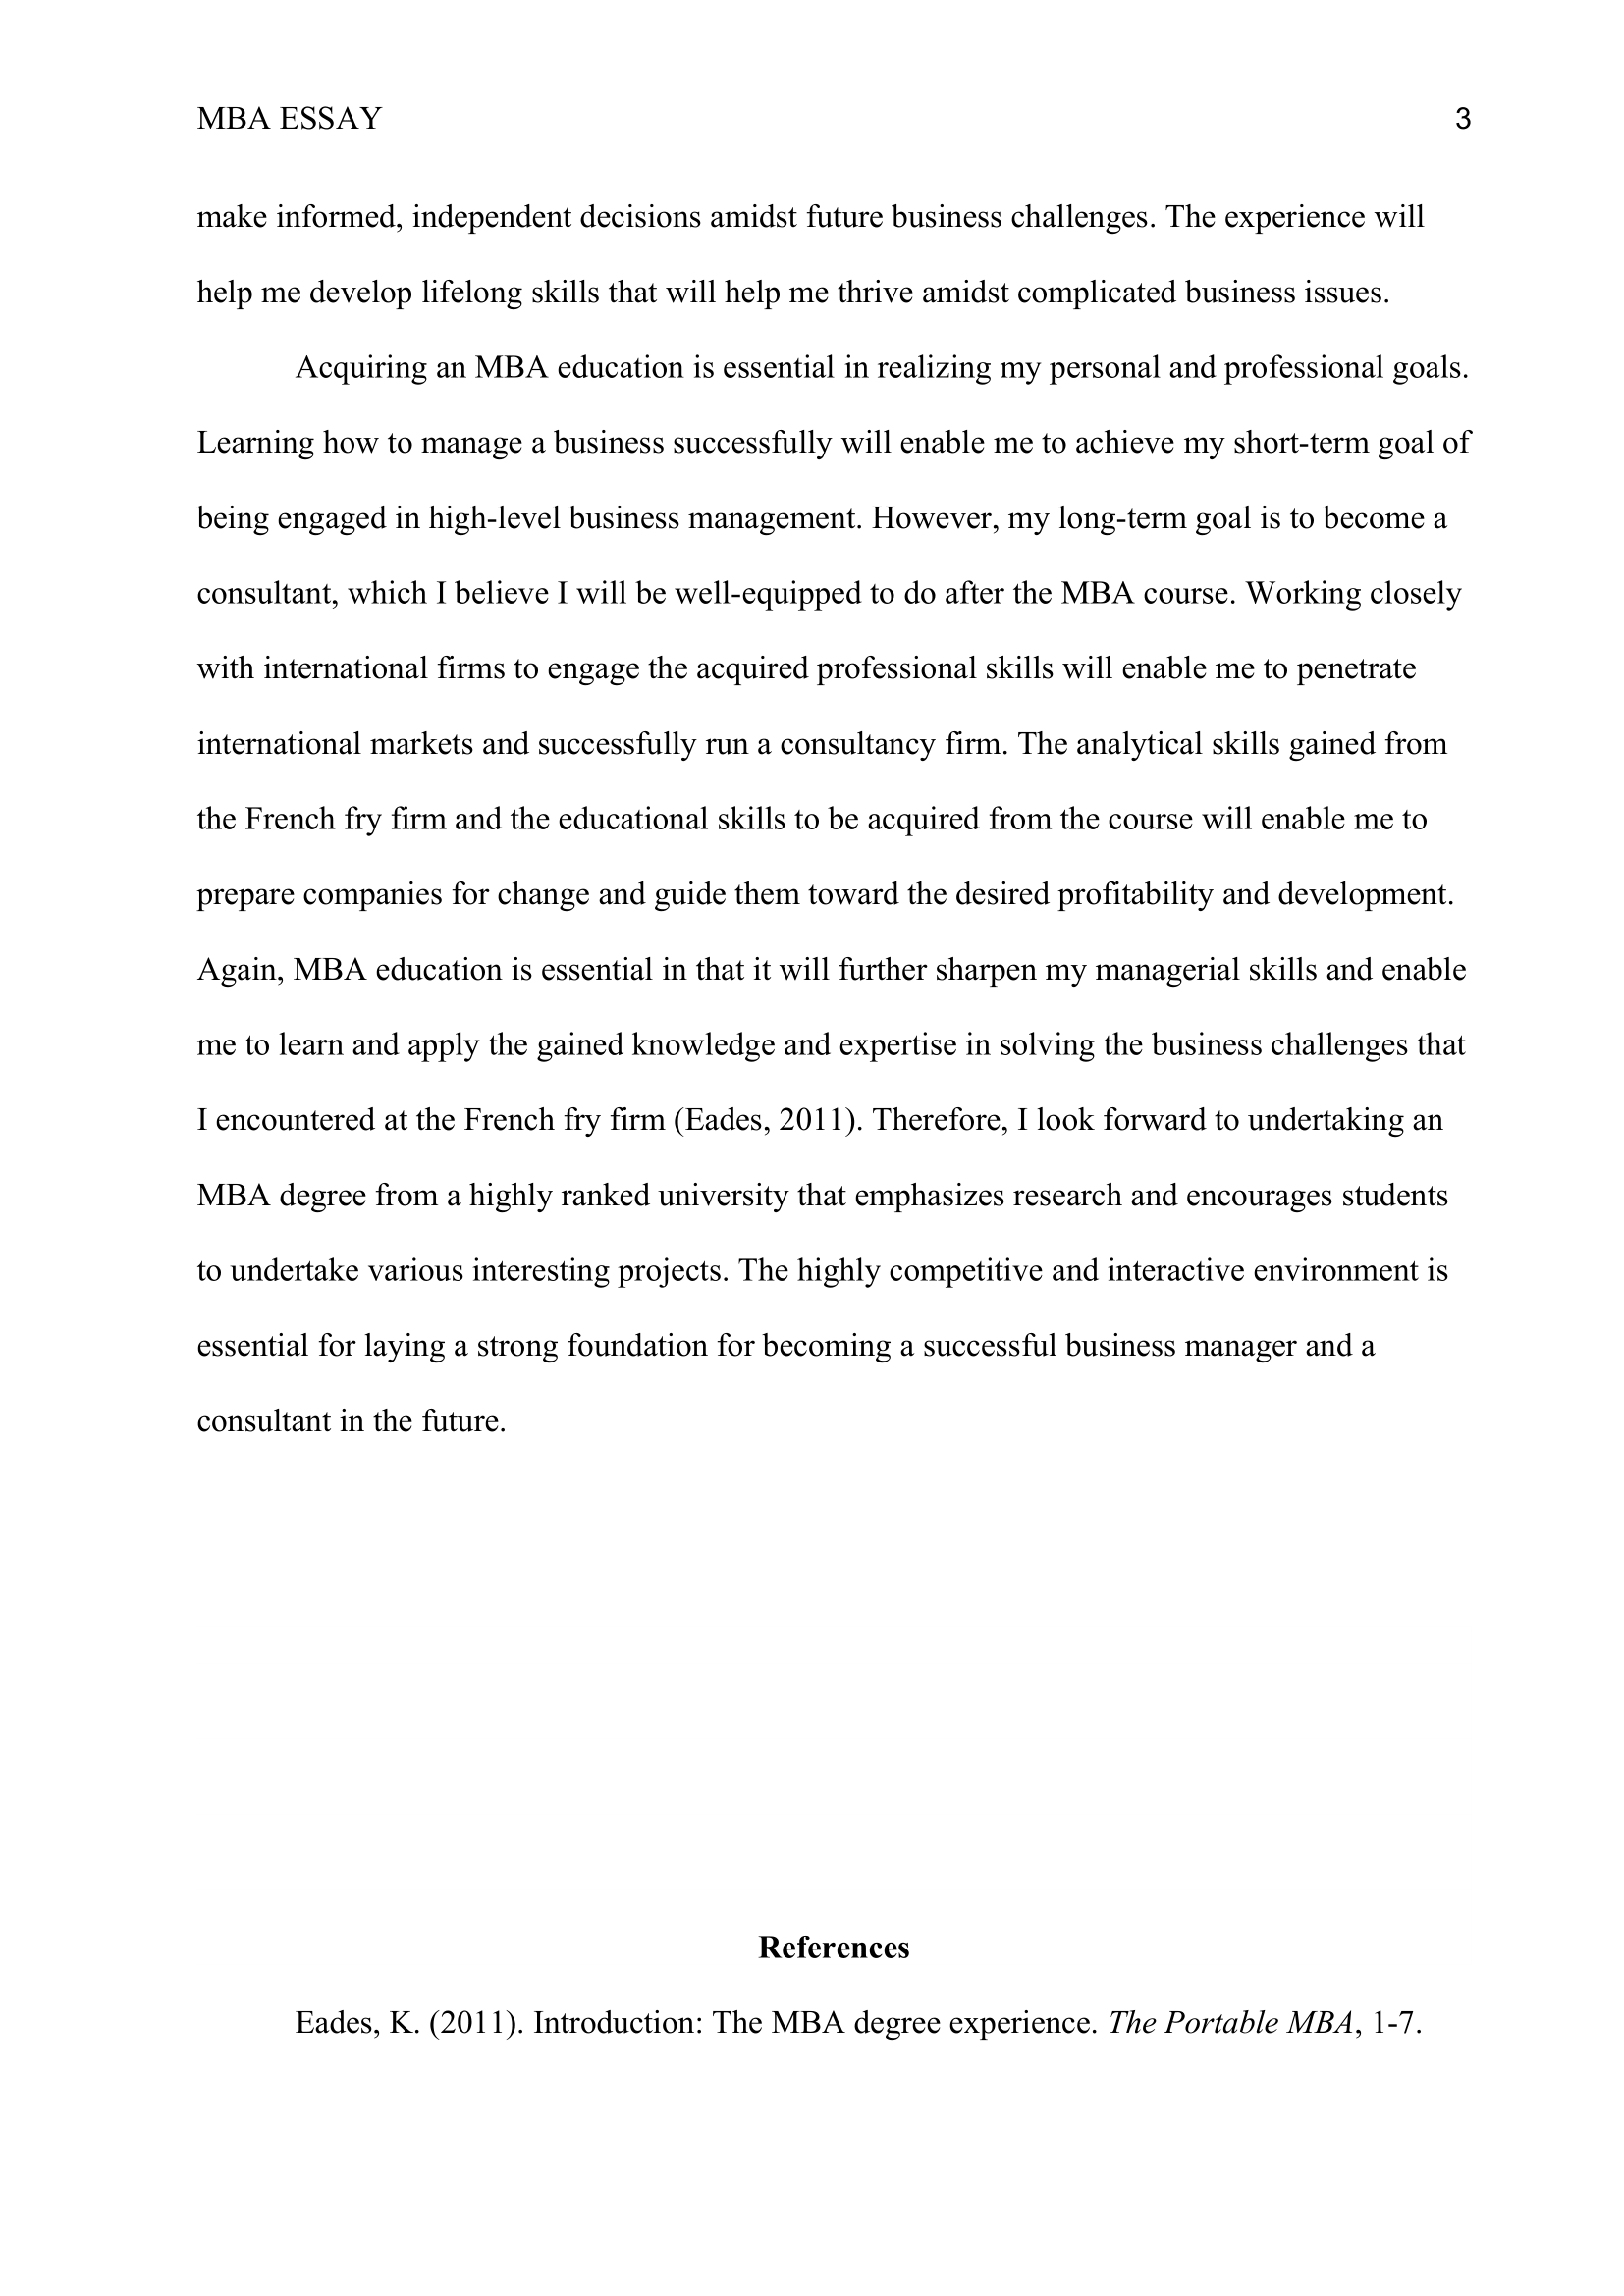 Senior project research paper